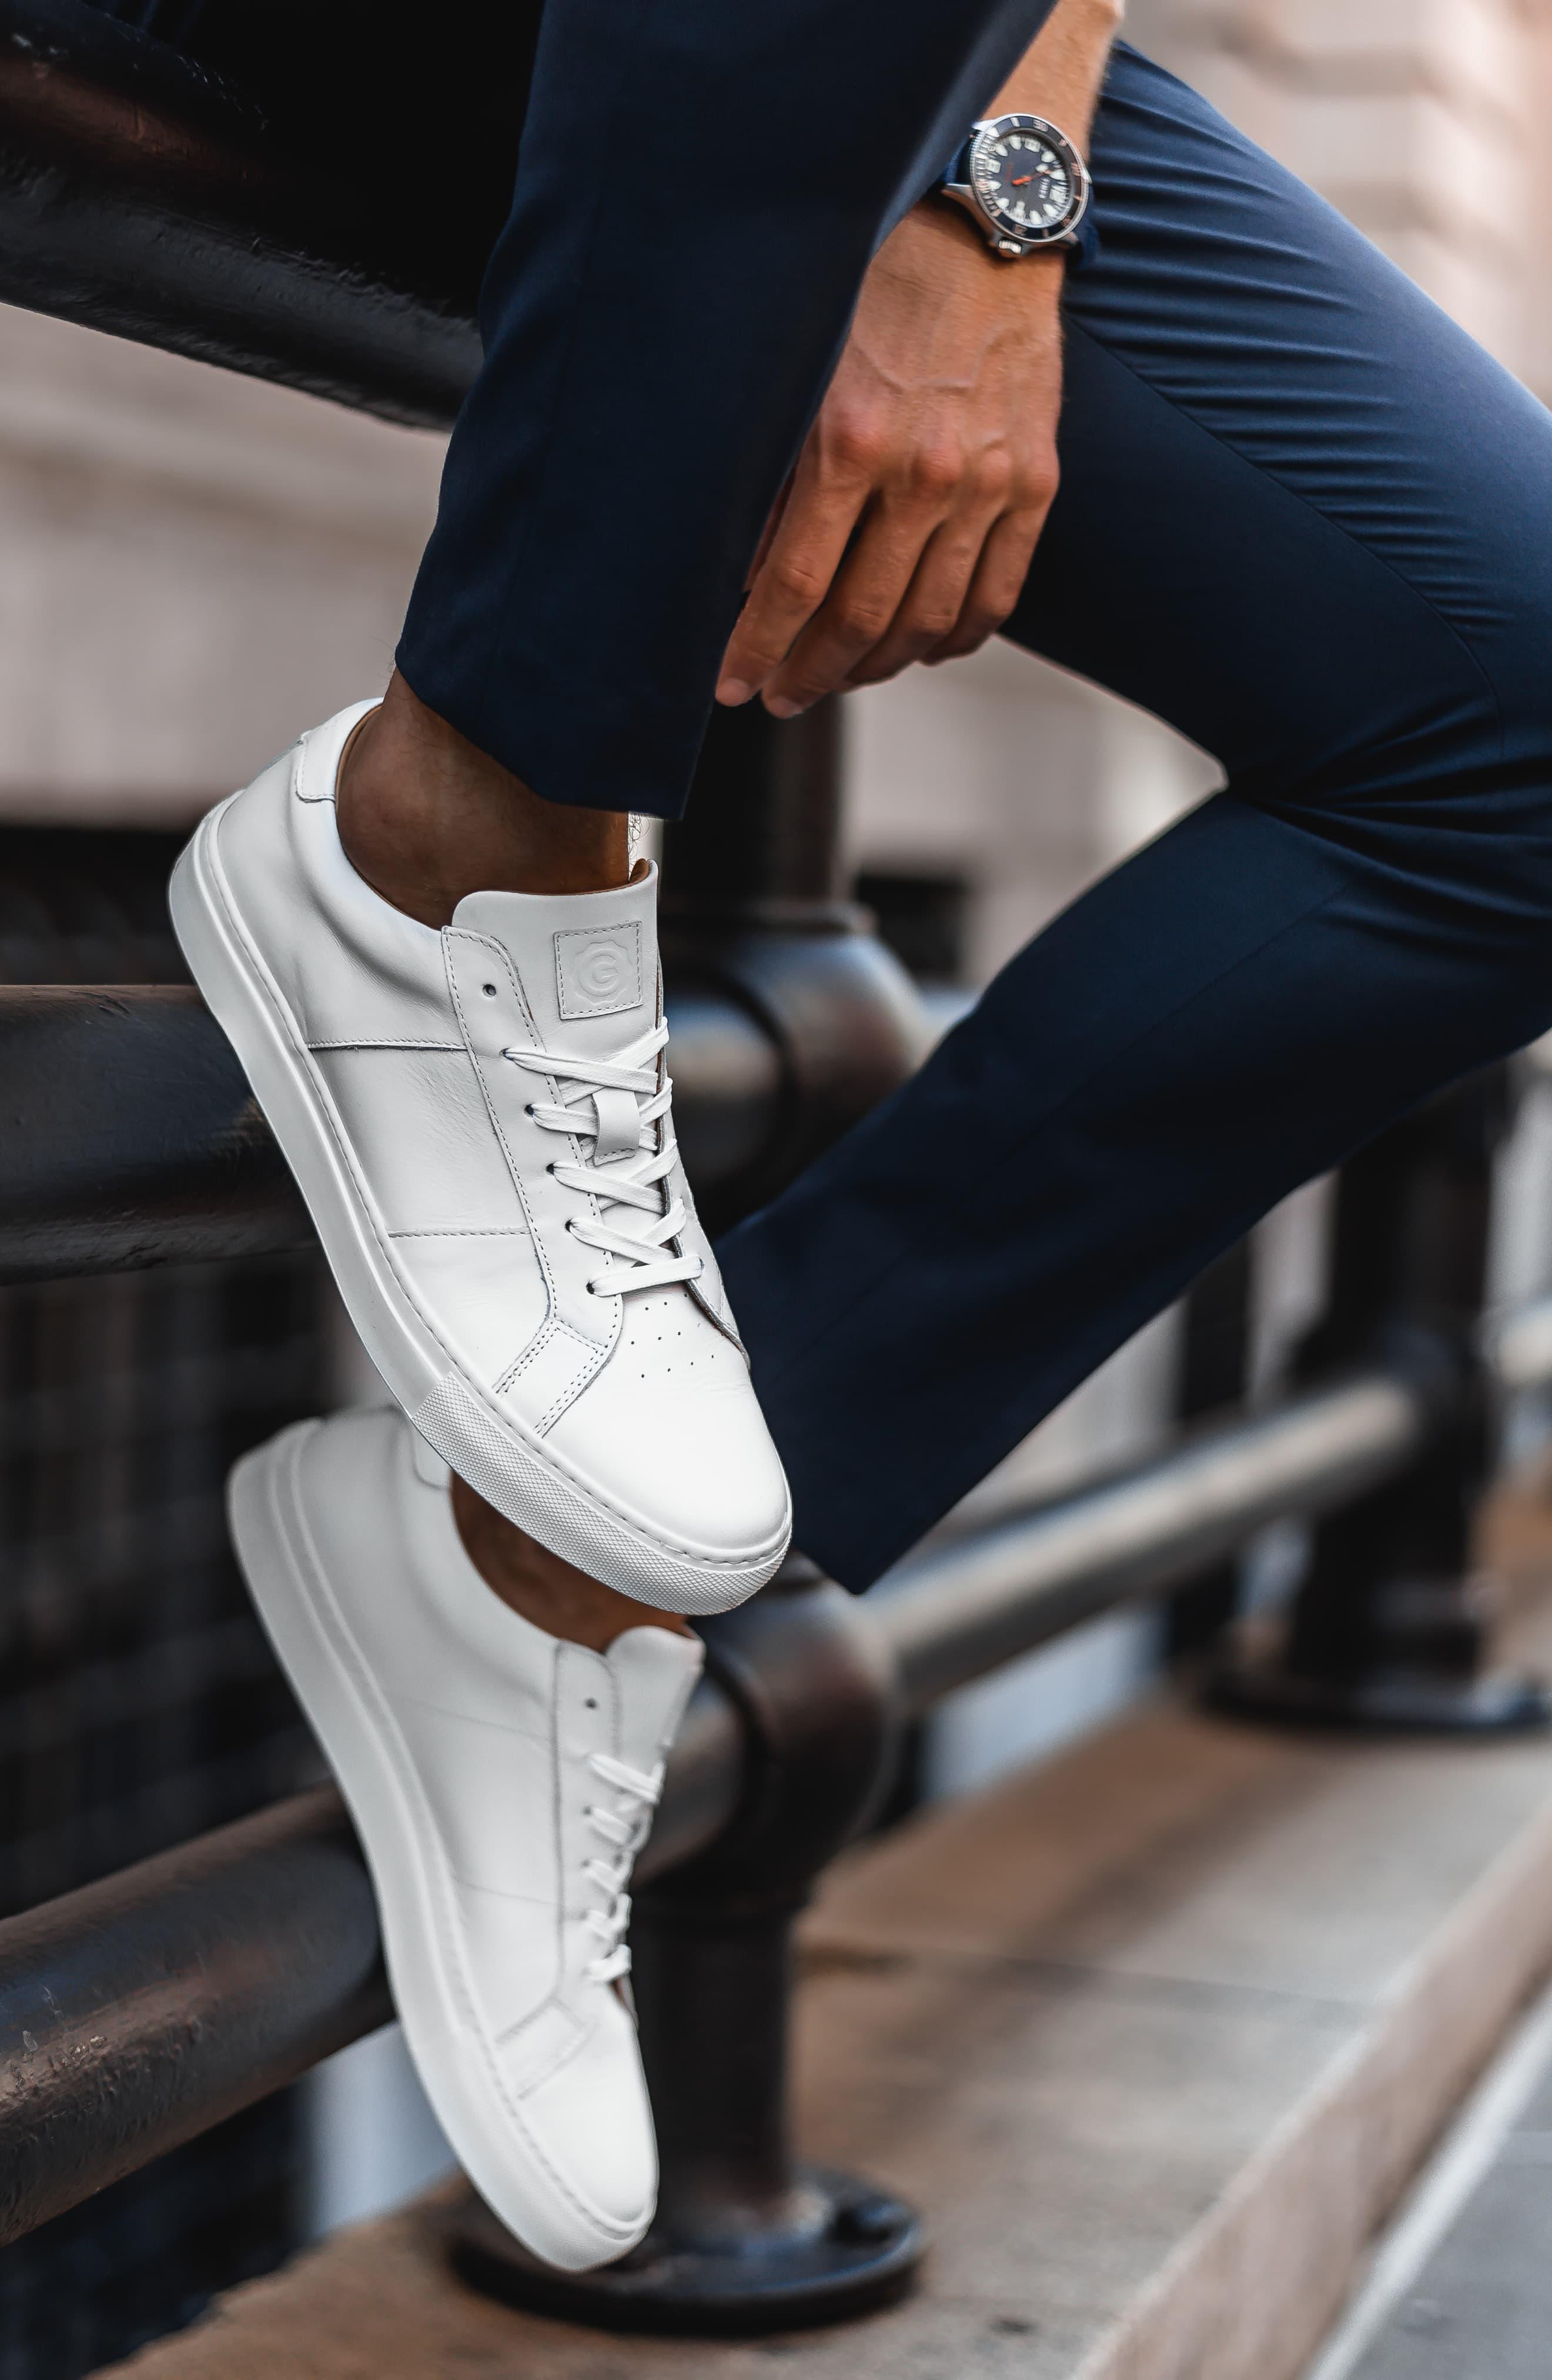 greats the royale sneaker